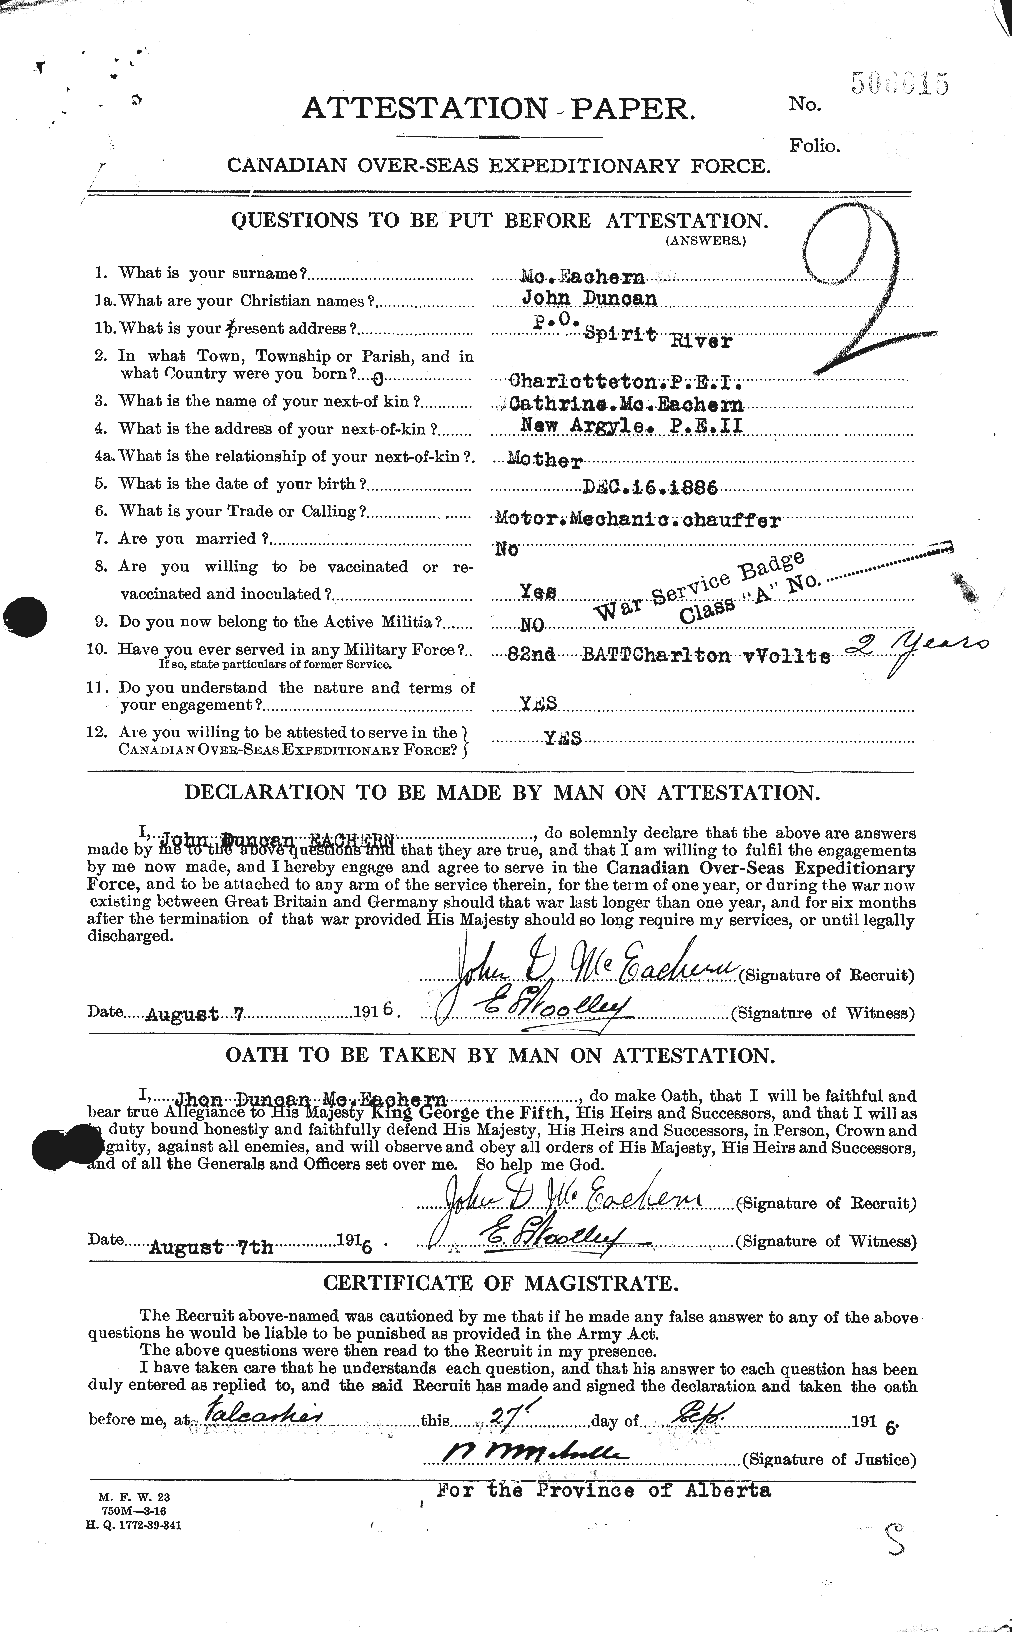 Personnel Records of the First World War - CEF 520883a